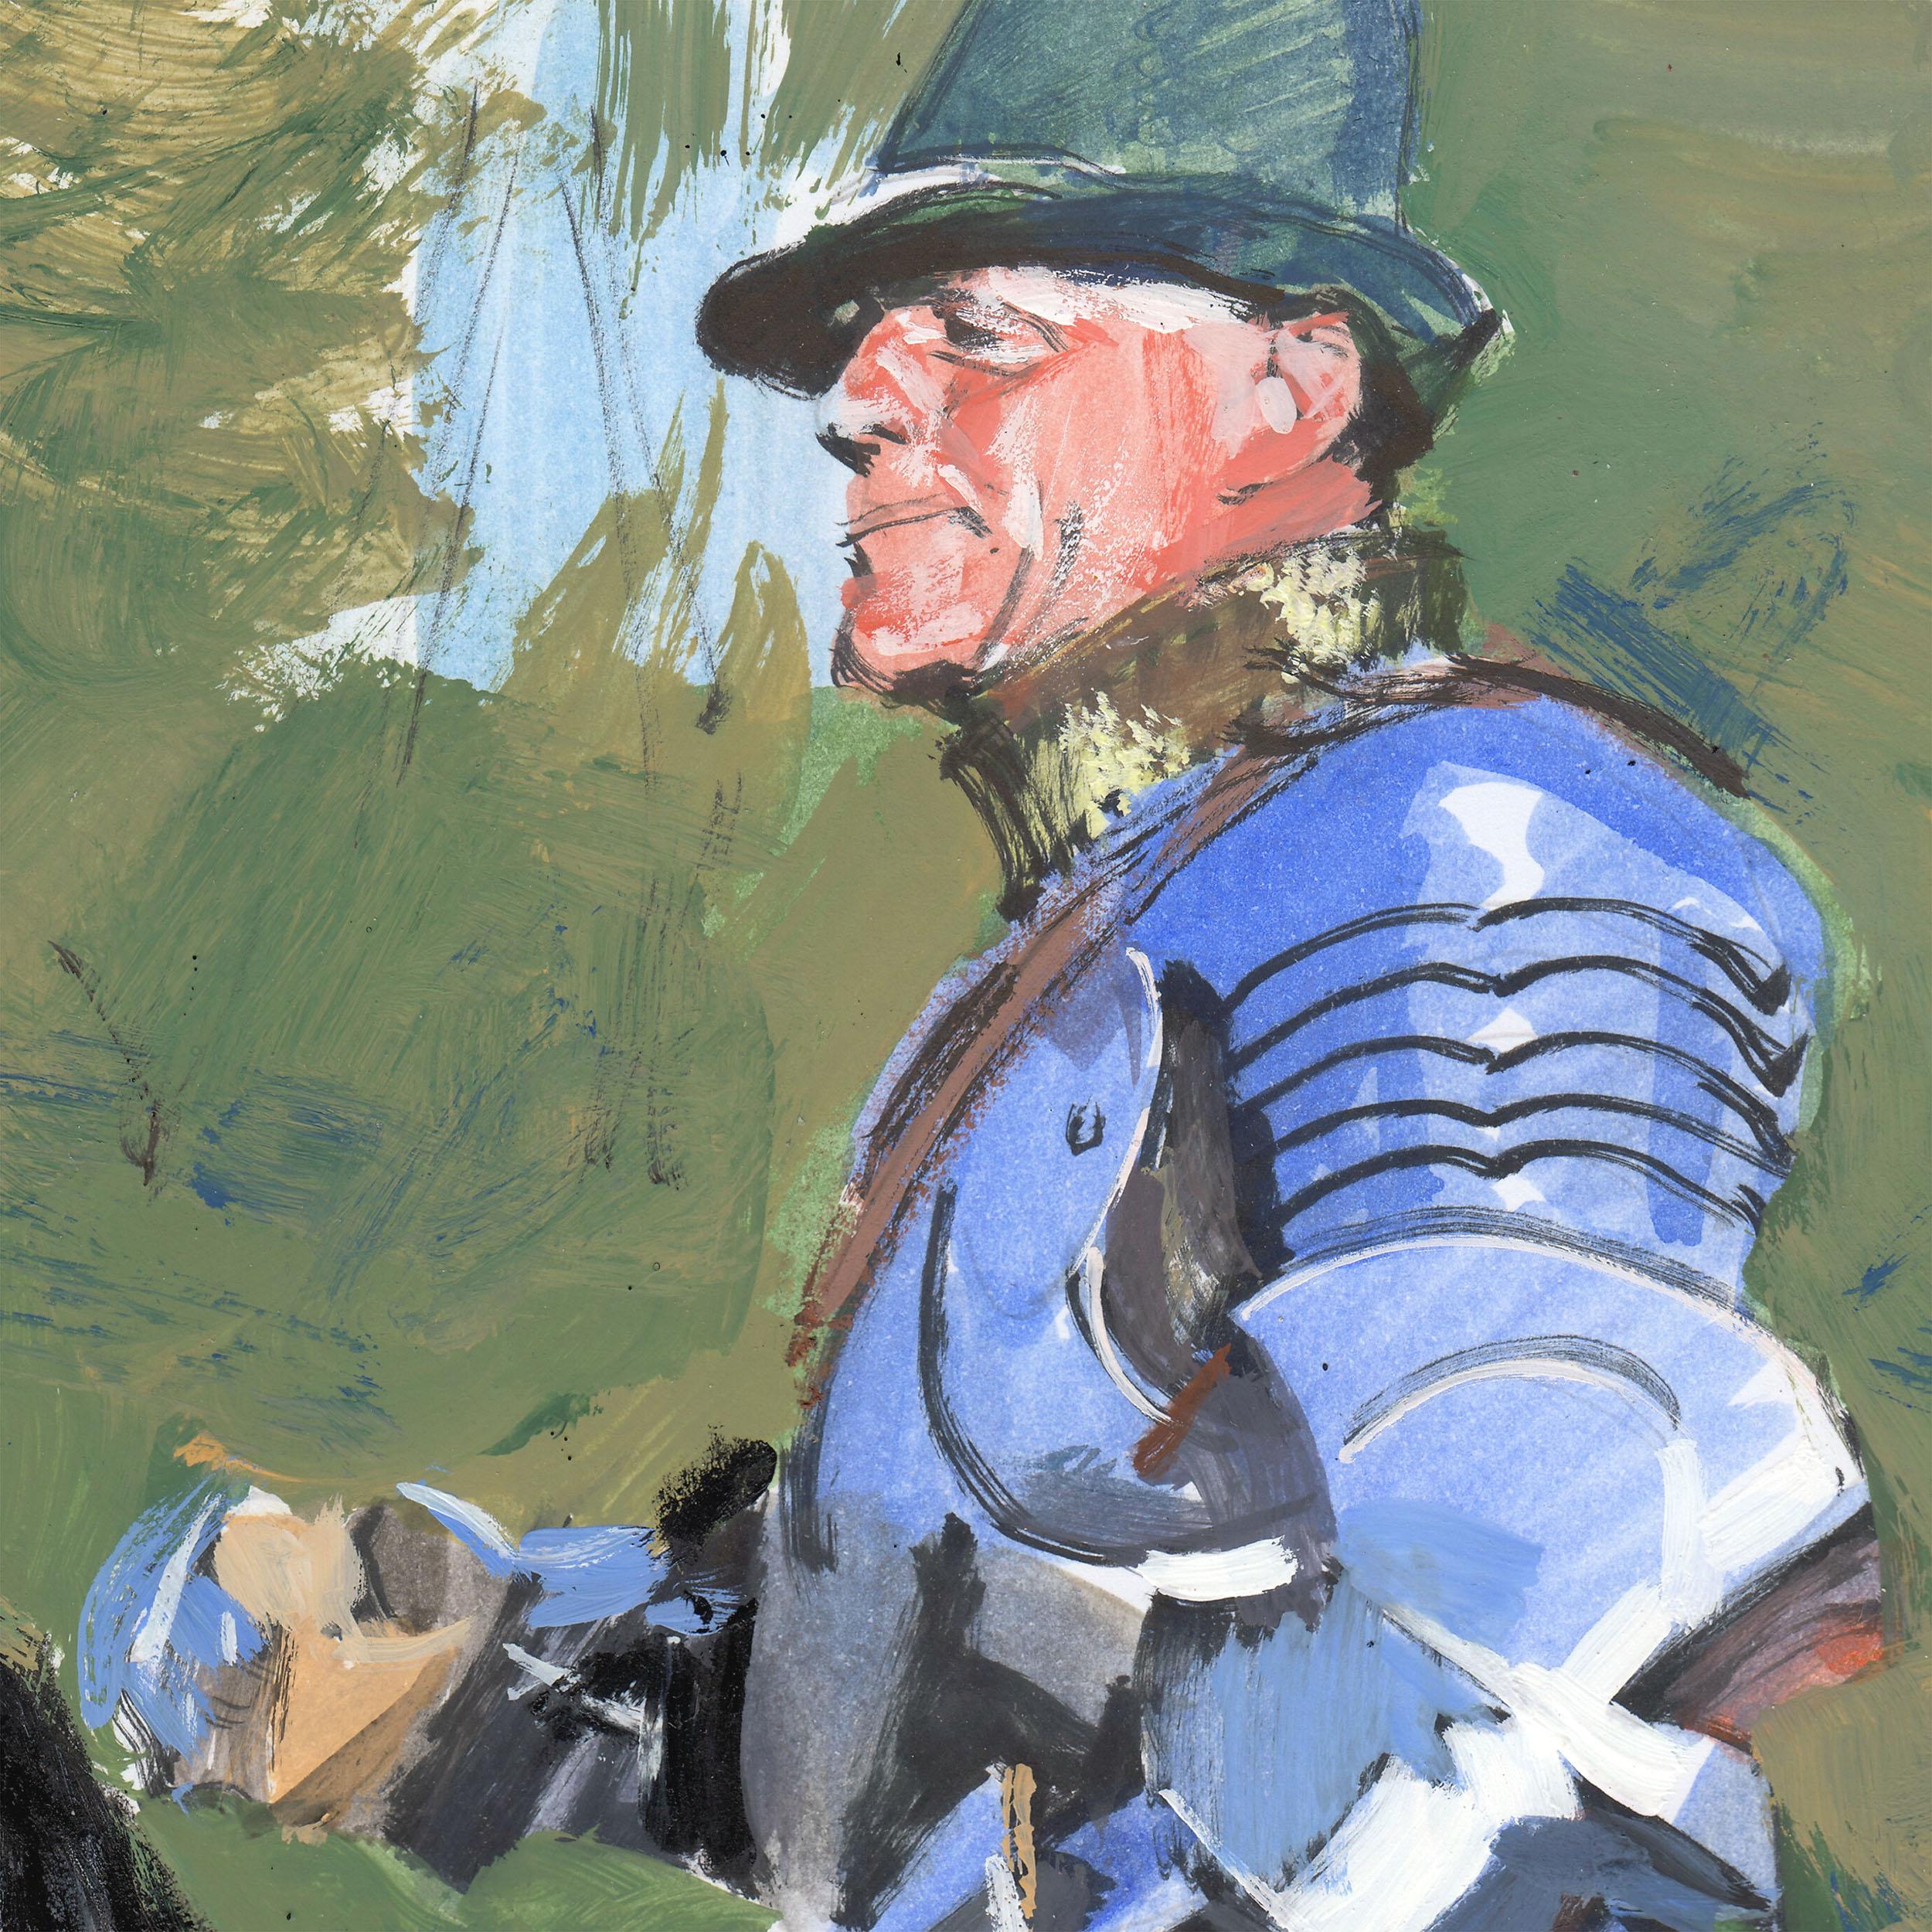 Sir Dominic Sewell at the St. George's Jousting Tournament in Moscow in 2019 - Art by Evgeniy Monahov